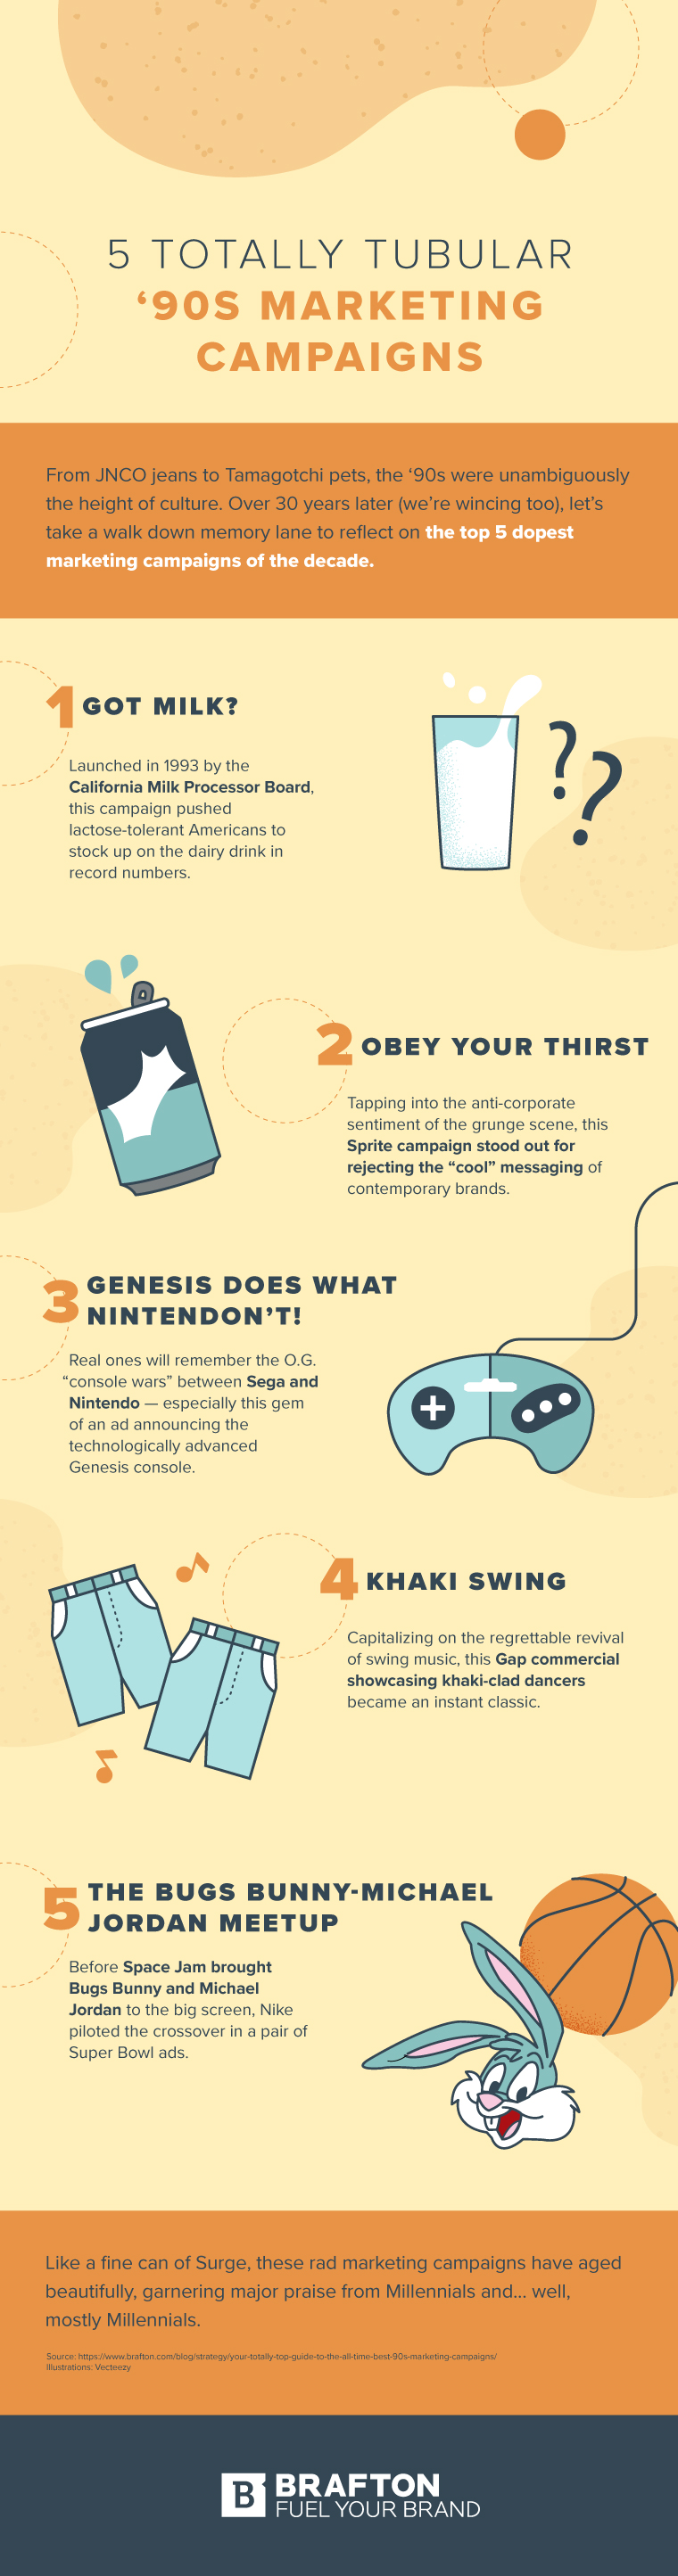 5 Totally Tubular ‘90s Marketing Campaigns infographic